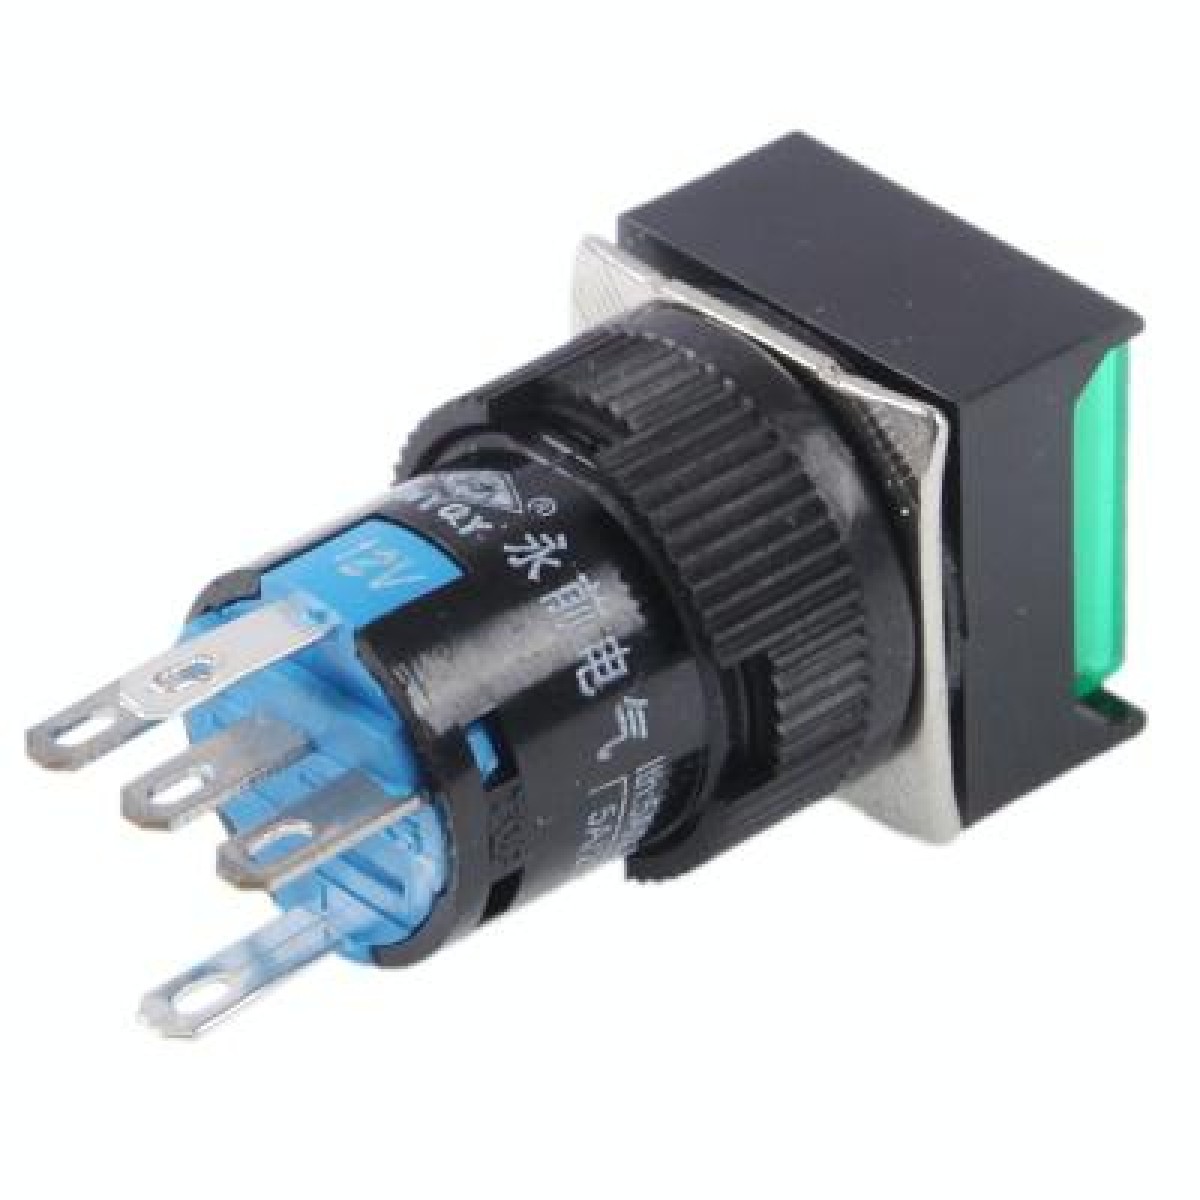 Car DIY Square Button Push Switch with Lock & LED Indicator, DC 24V(Green)